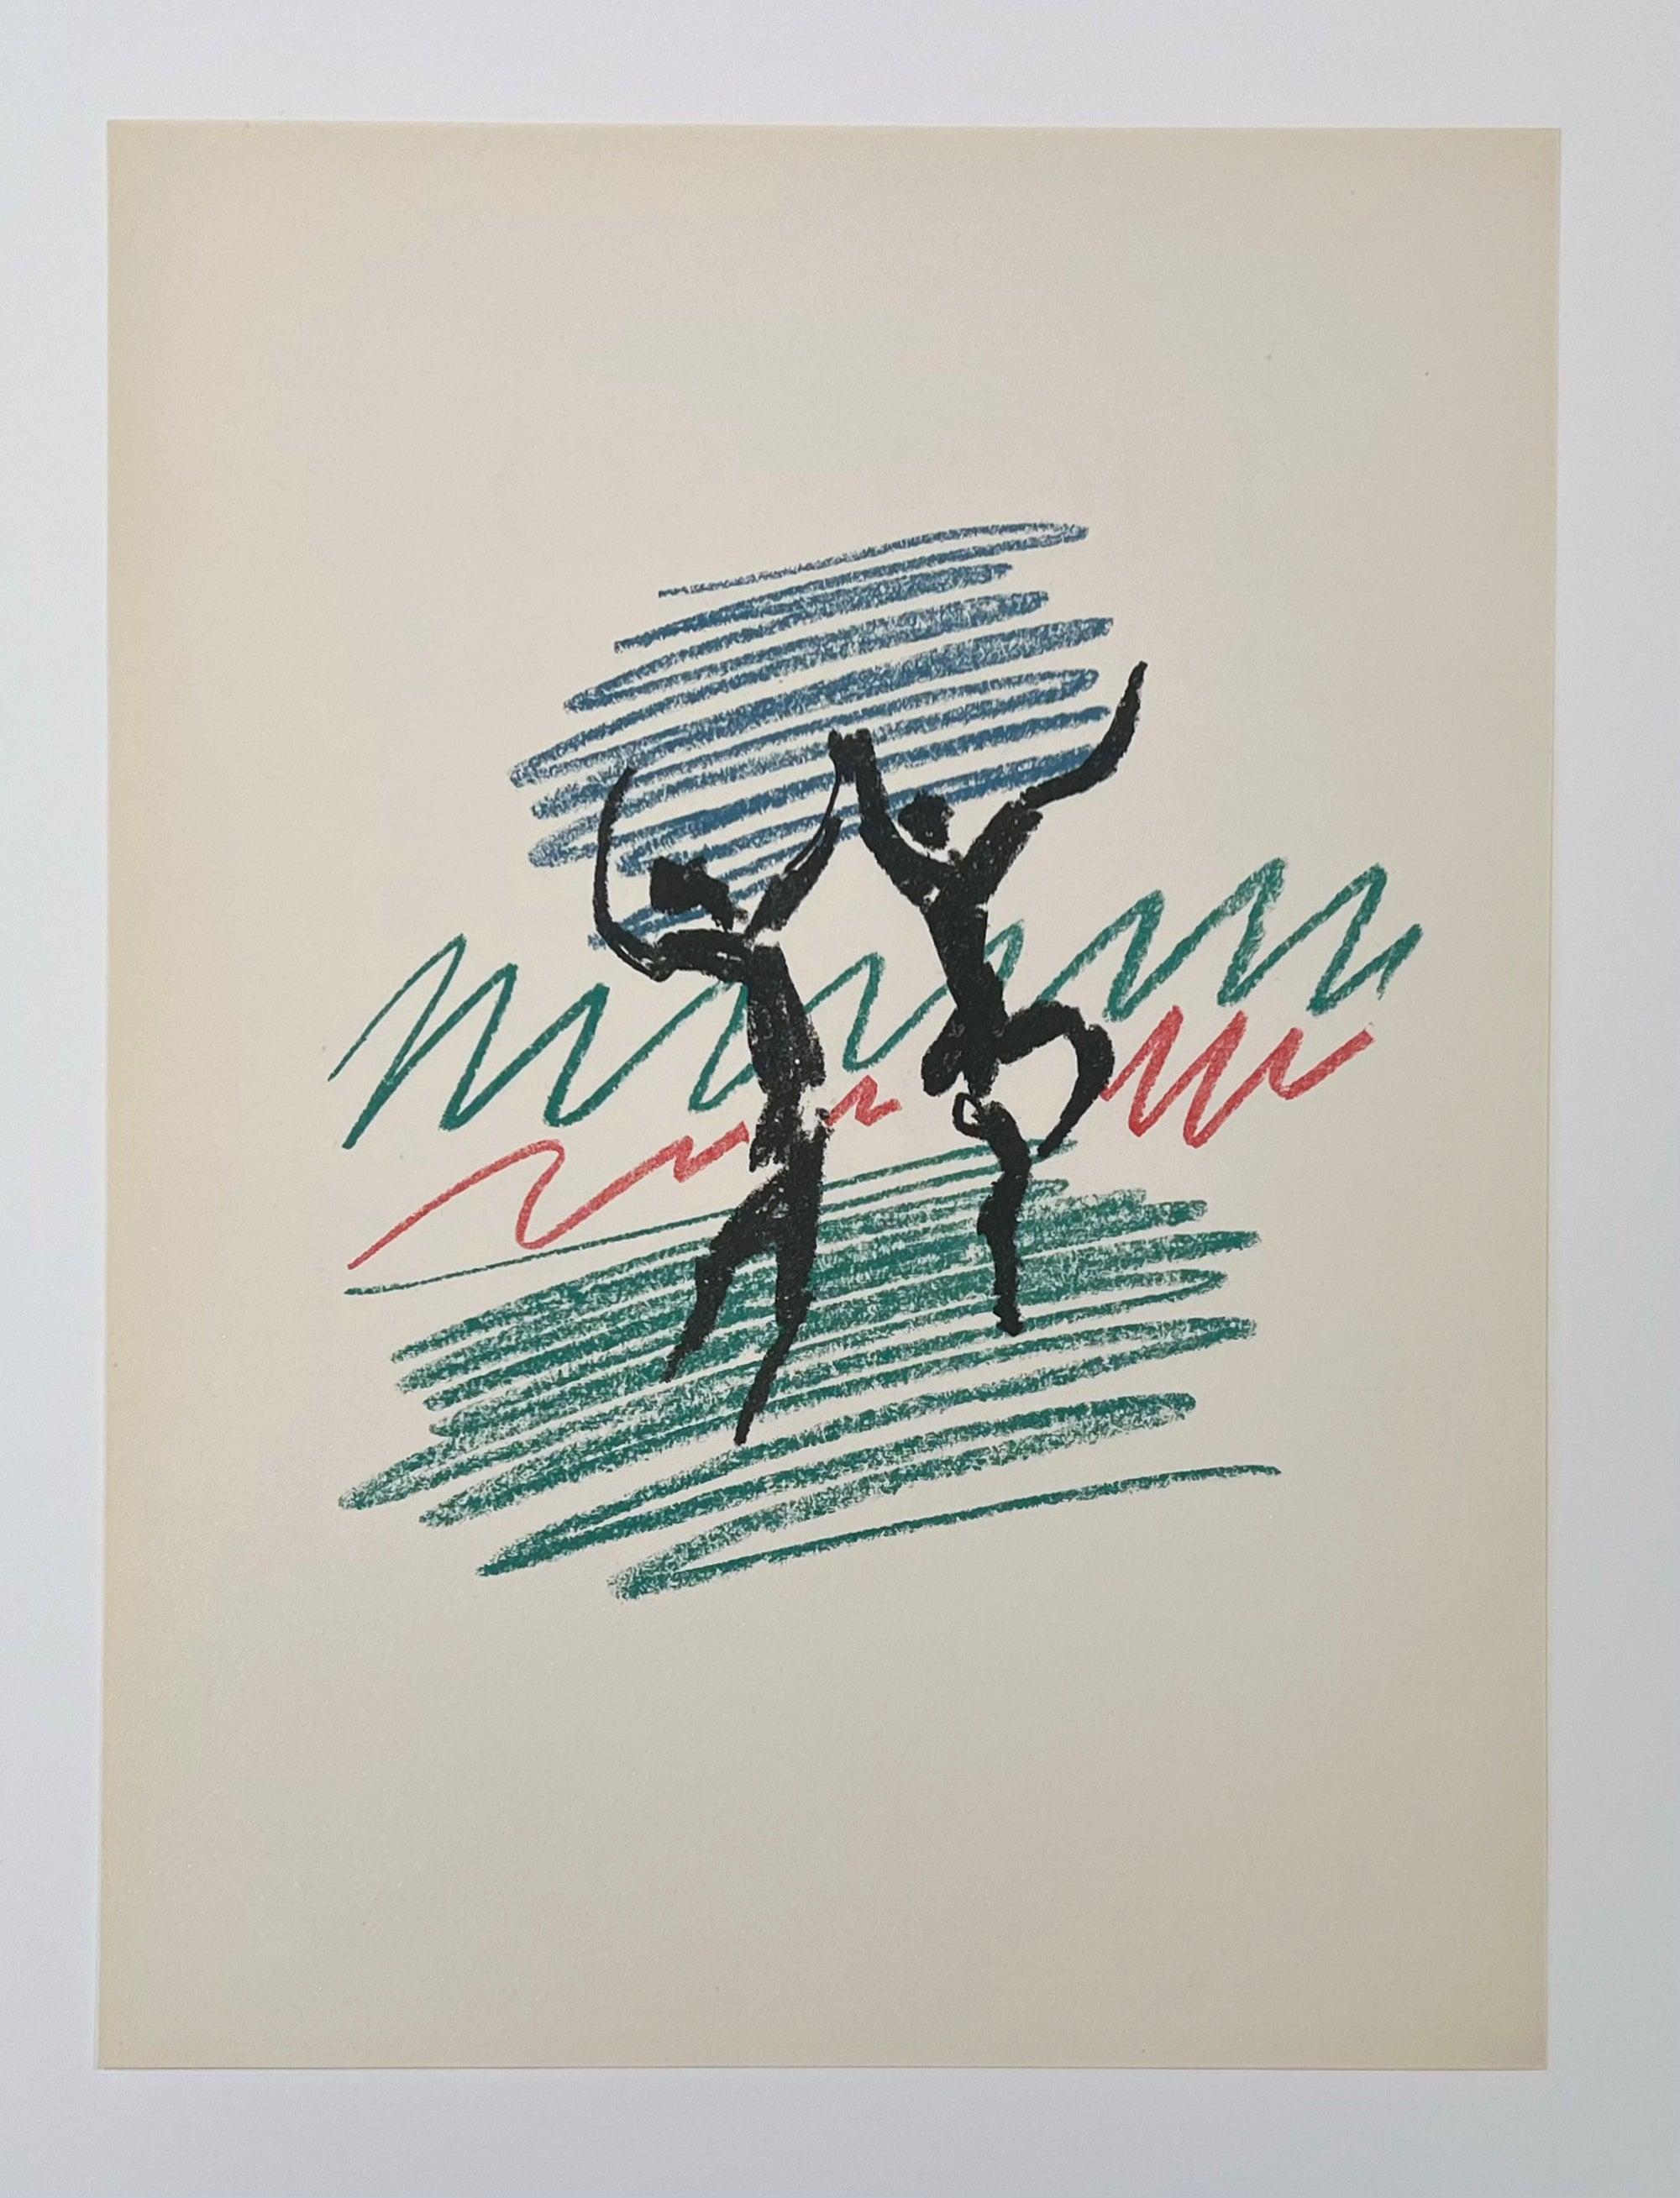 La Danse, frontispiece from Picasso Lithographe III  - Modern Print by Pablo Picasso